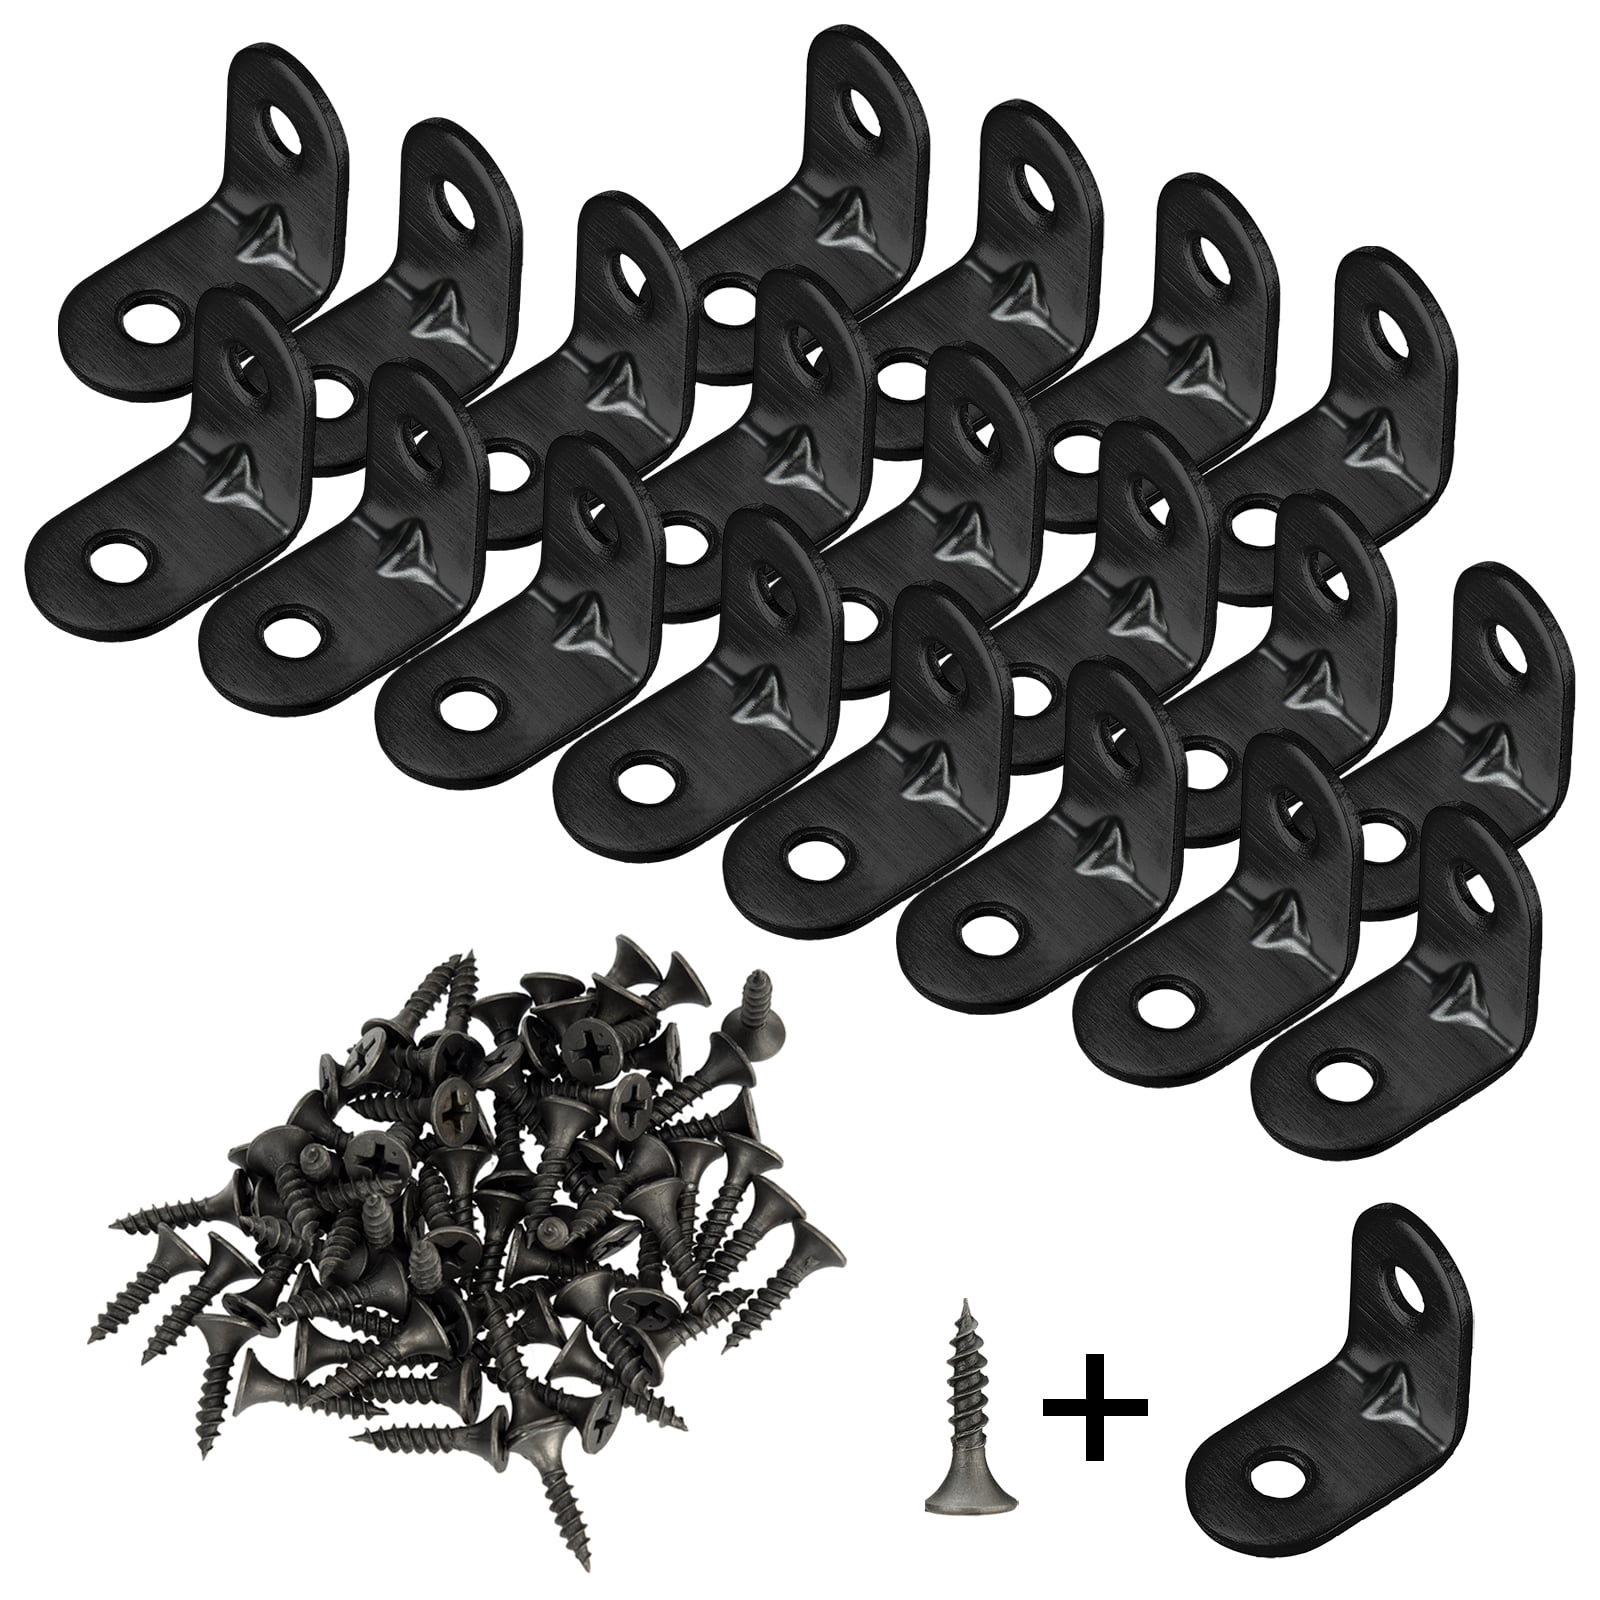 Furniture 90 Degree Corner Braces 20 x 20 mm Cabinet 20 Pieces Right Angle Brackets Fasteners L Shaped Corner Bracket with 40 Pieces Screws for Wood Shelves